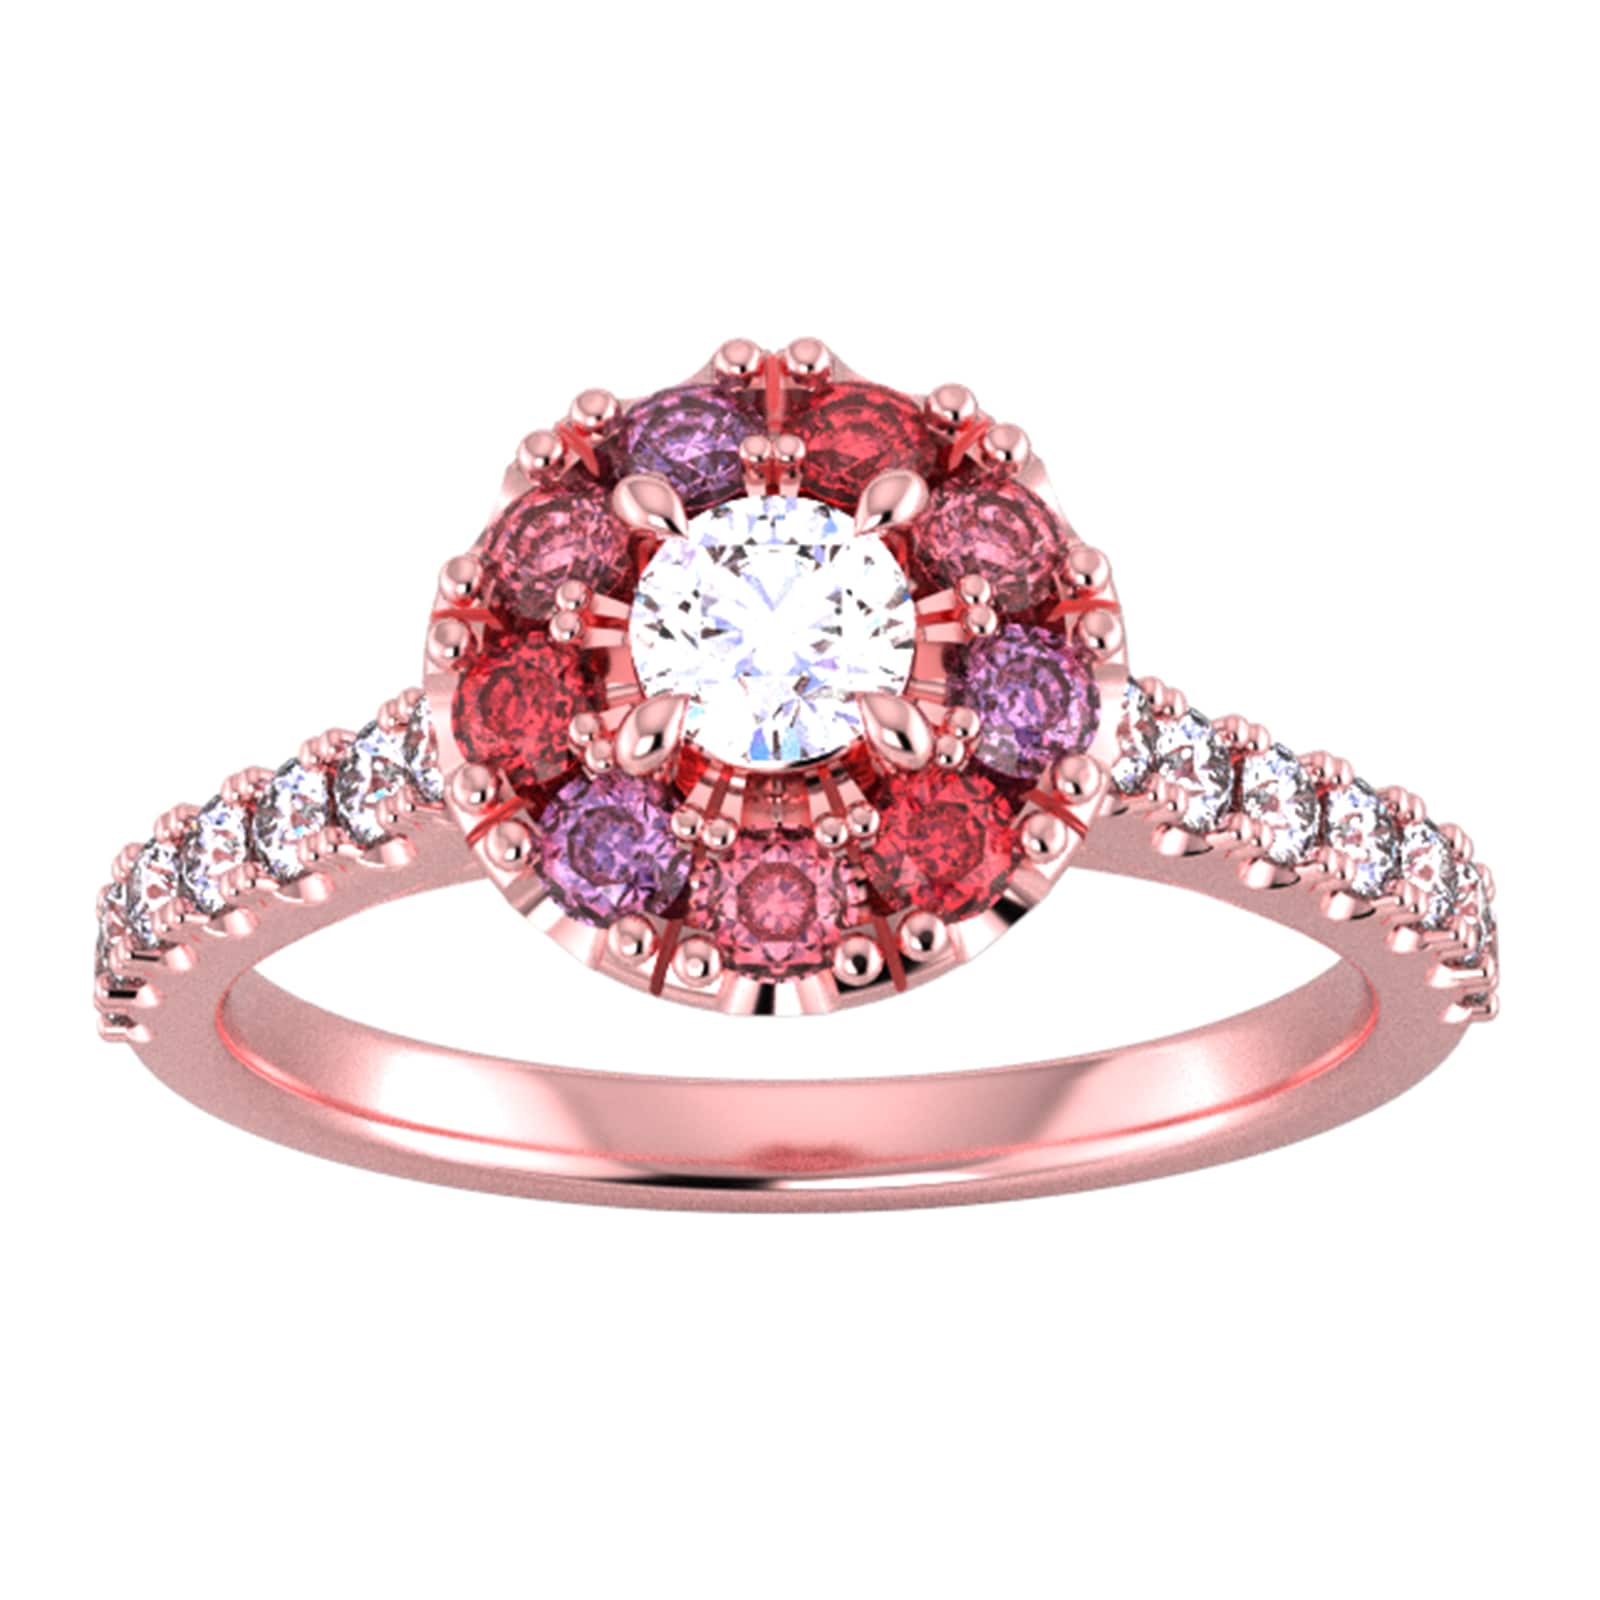 9ct Rose Gold Diamond & Red, Pink, Purple Sapphire Halo Ring - Ring Size F.5